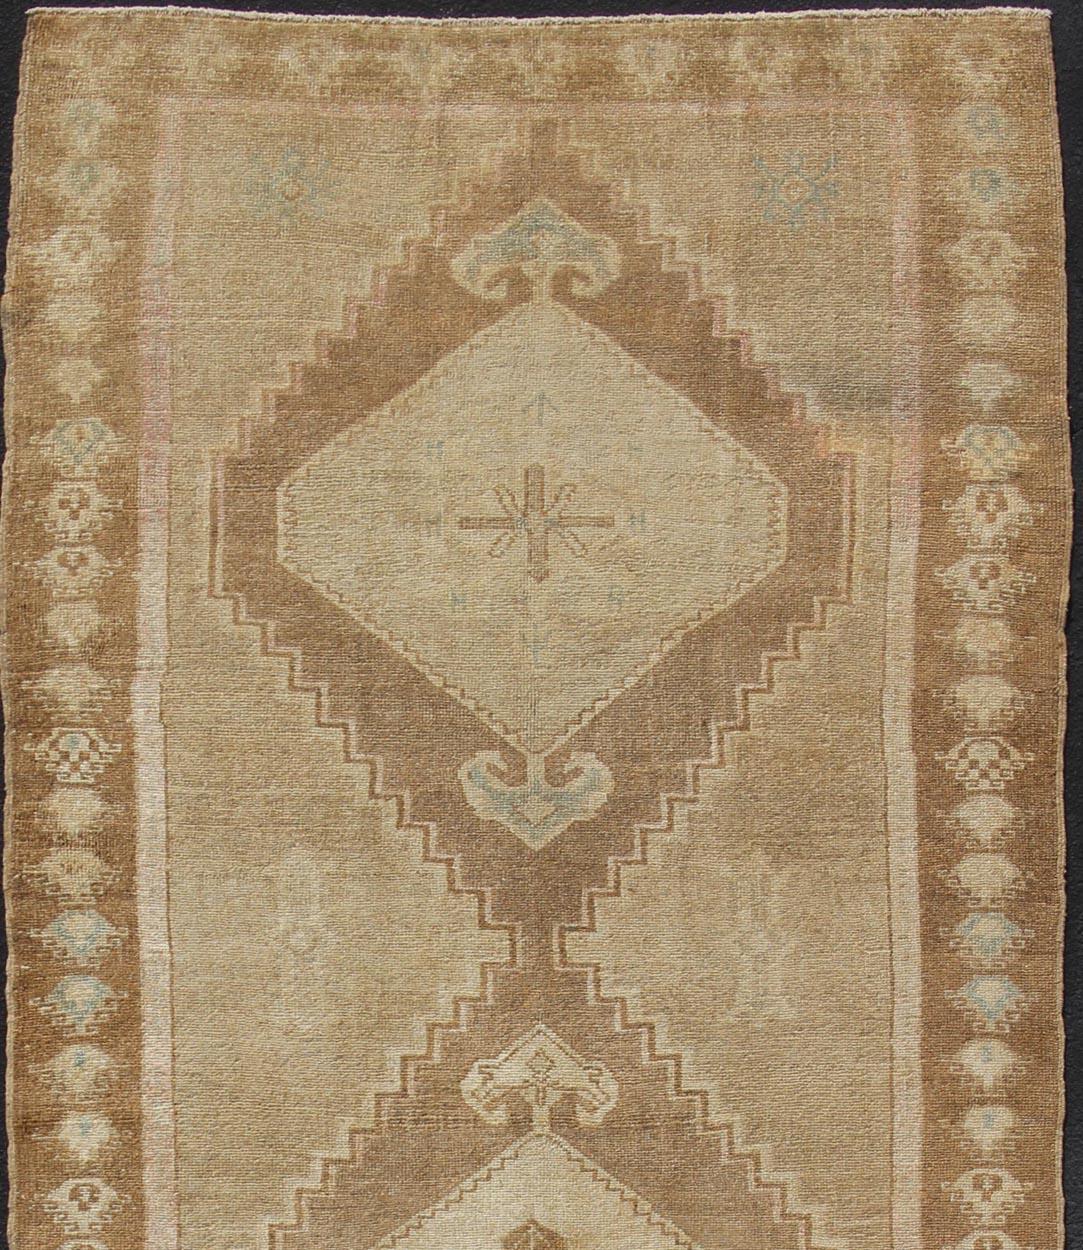 Vintage wide Gallery runner from Turkey with Medallion design in various tones of tan, sand, taupe and light brown rug en-179015 country of origin / type: Turkey / Kars, circa 1940. Large Gallery Turkish rug in Earth tones, light brown with three